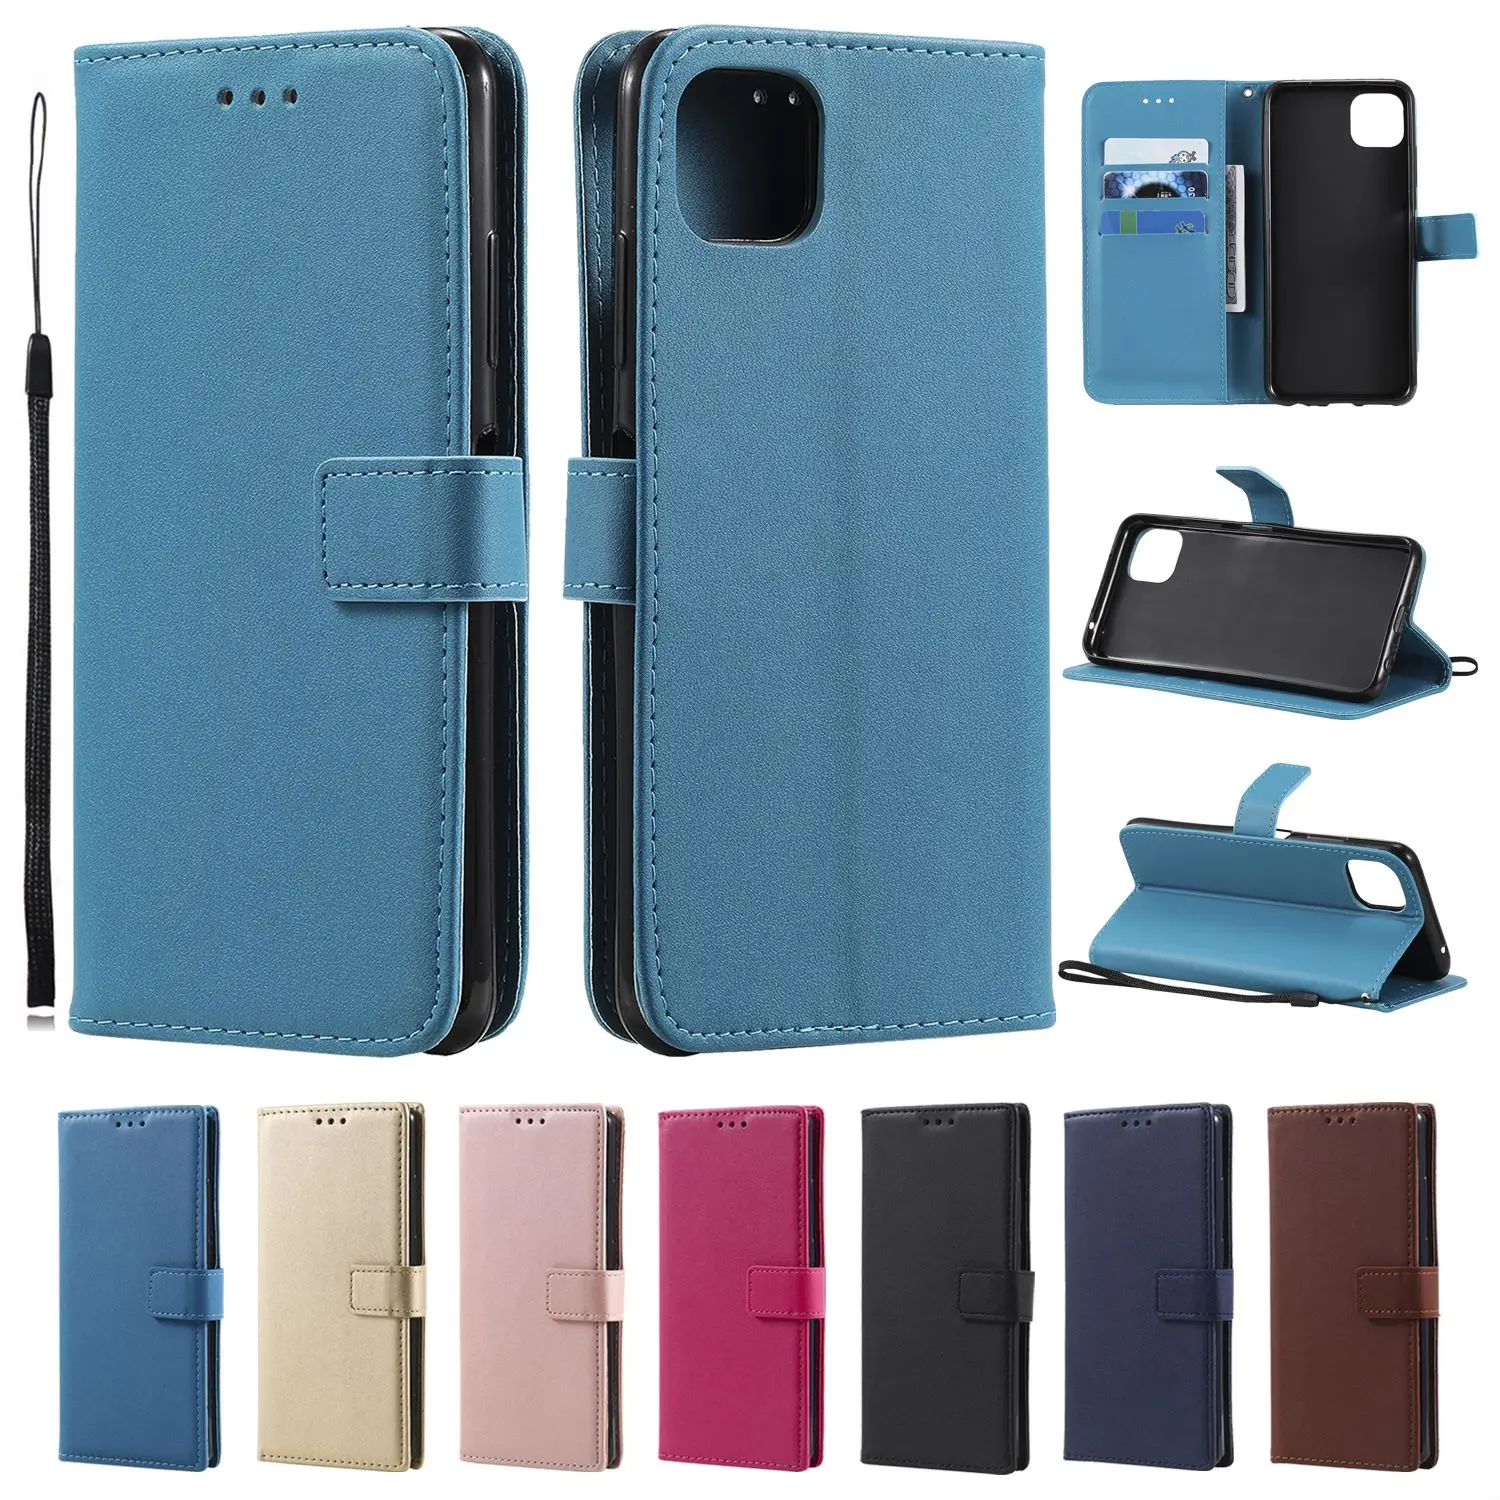 

Wallet Phone Case For Sony Xperia Z3 Plus Z4 Z5 Mini M4 M5 E4 E5 X XZ XZ1 Compact XA Ultra XA2 C6 L1 E6 L2 Leather Phone Cases